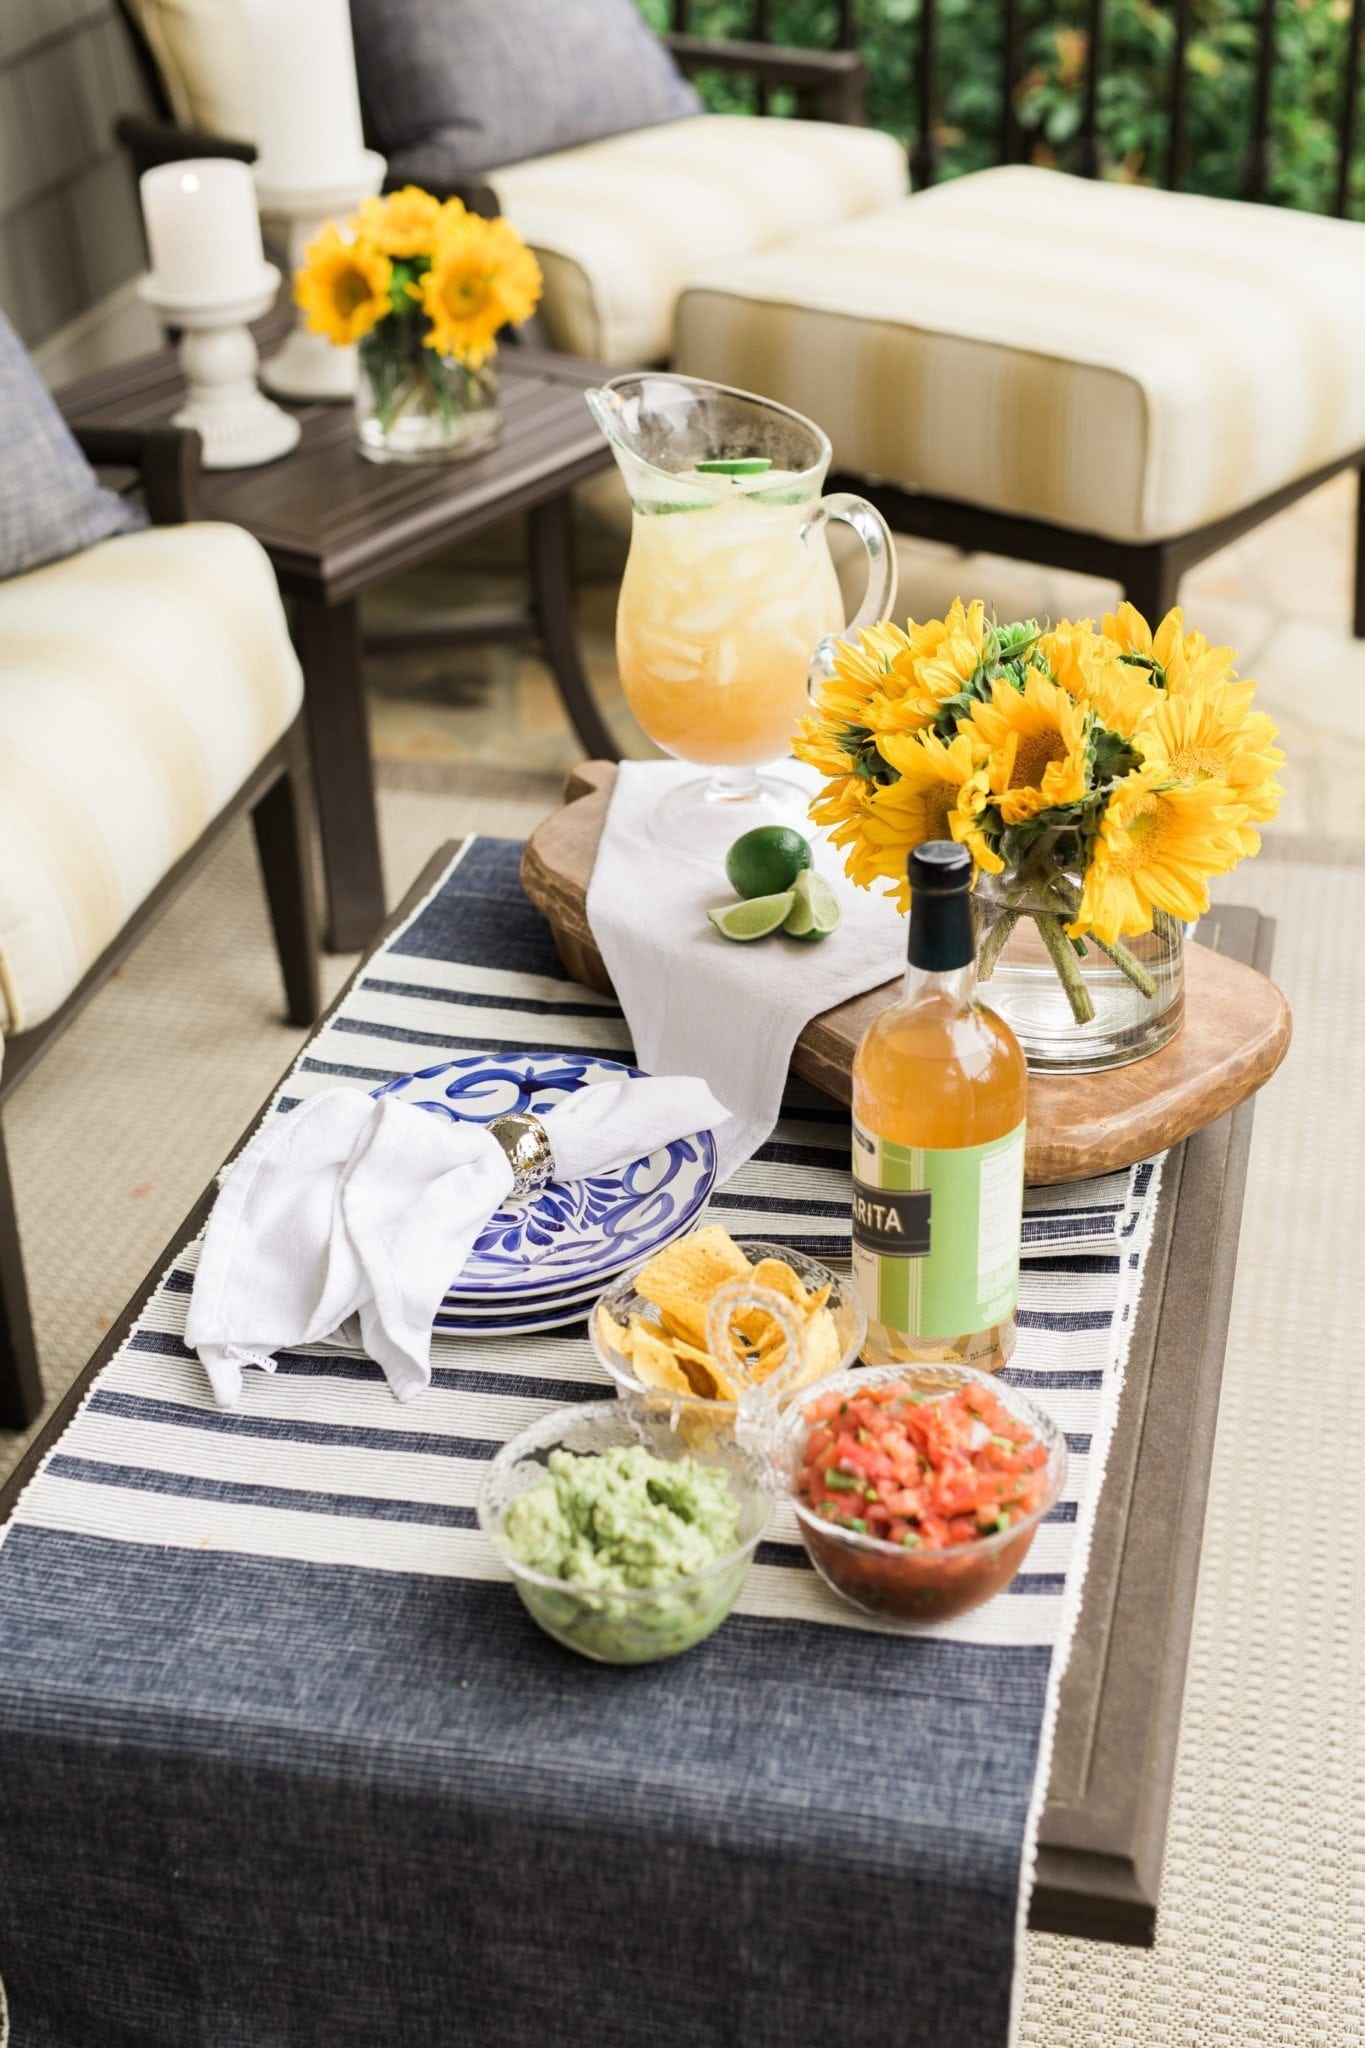 Fiesta party with blue and yellow. Yellow sunflowers and patio furniture filled with summer party fun!